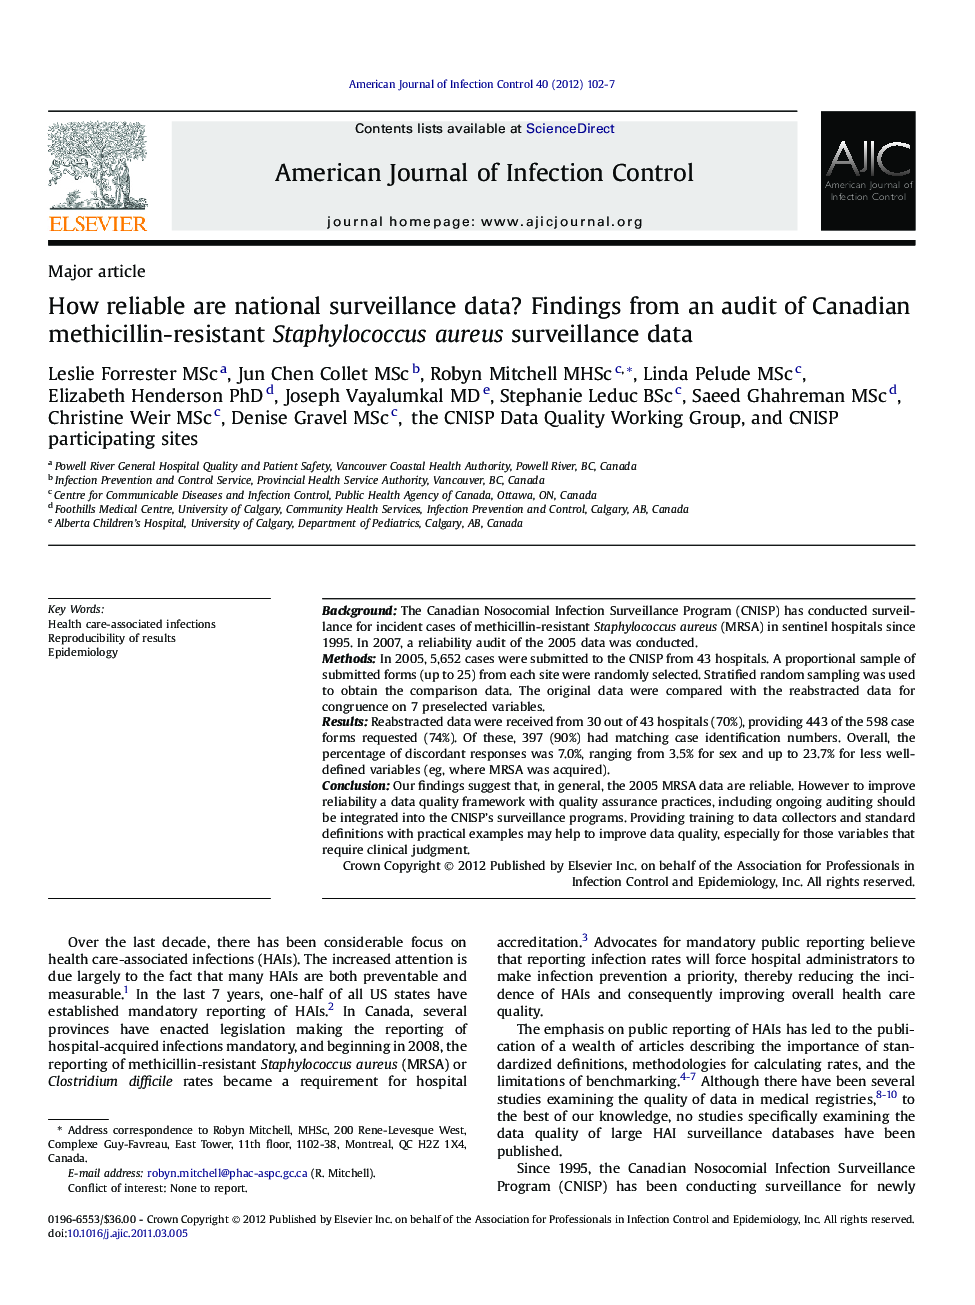 How reliable are national surveillance data? Findings from an audit of Canadian methicillin-resistant Staphylococcus aureus surveillance data 